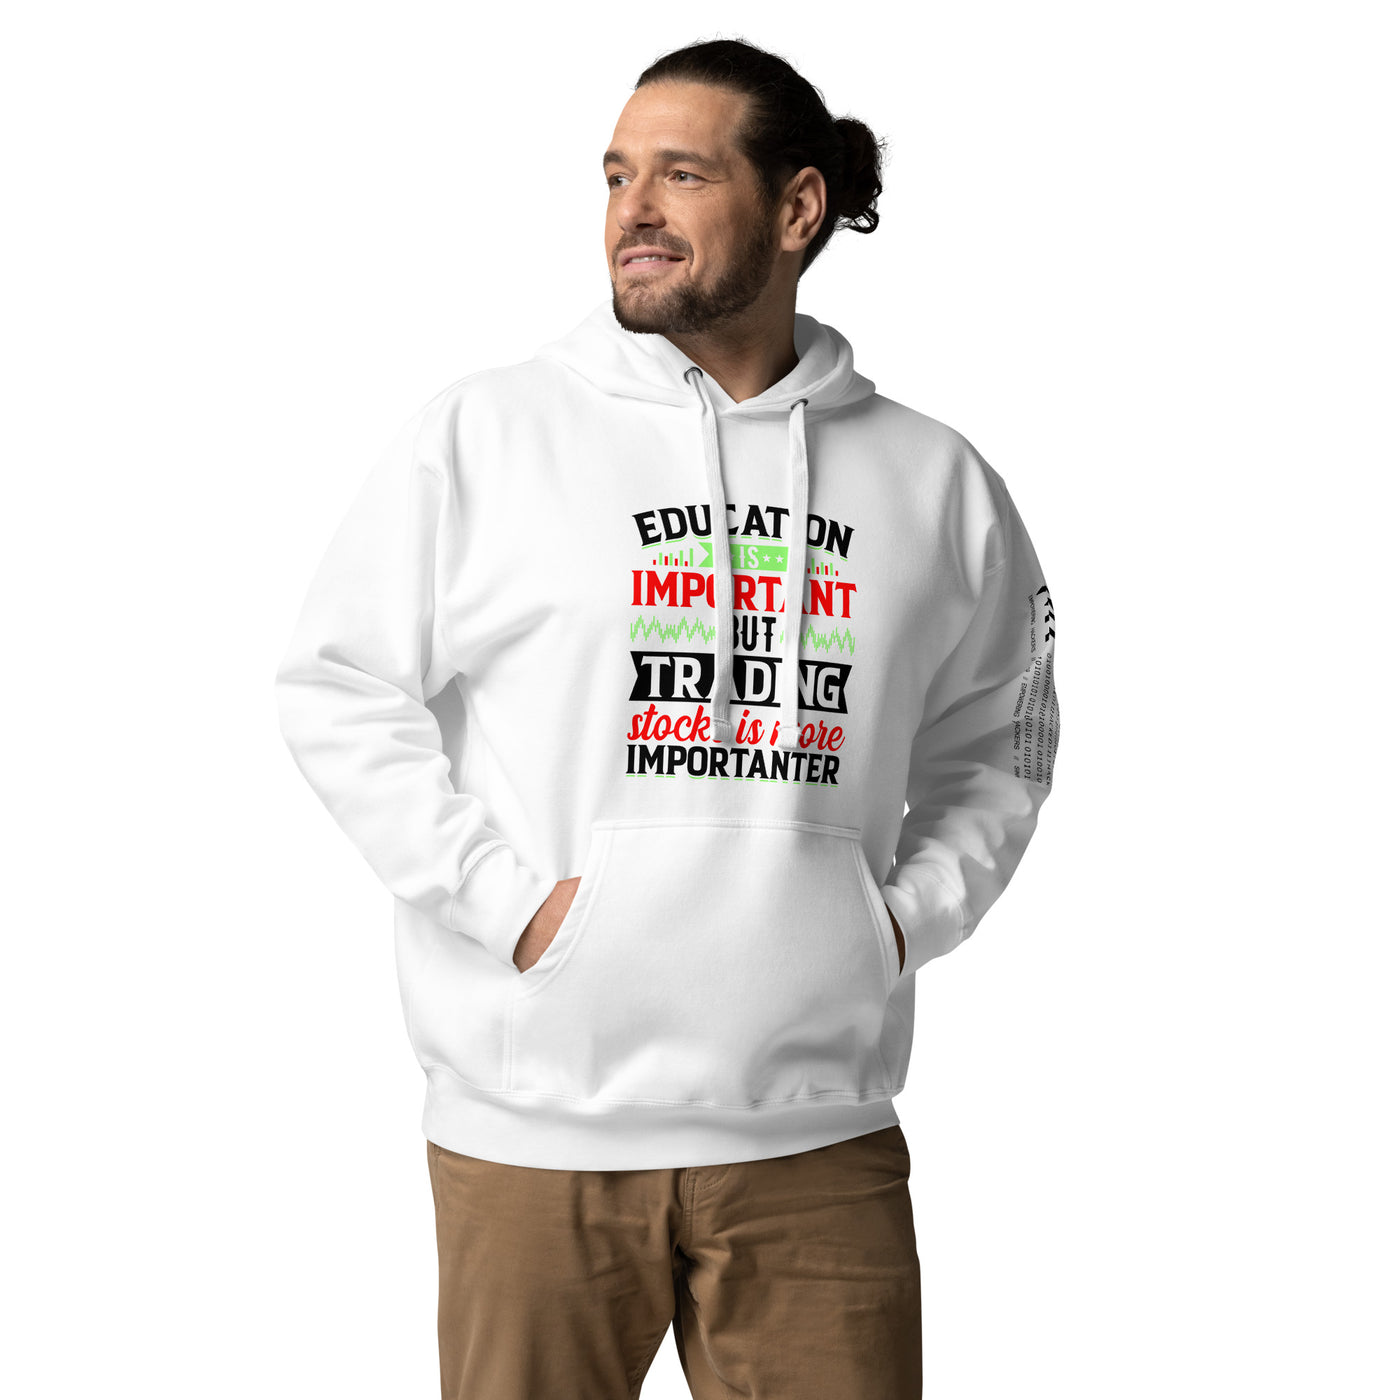 Education is important but trading stocks is more importanter in Dark Text - Unisex Hoodie